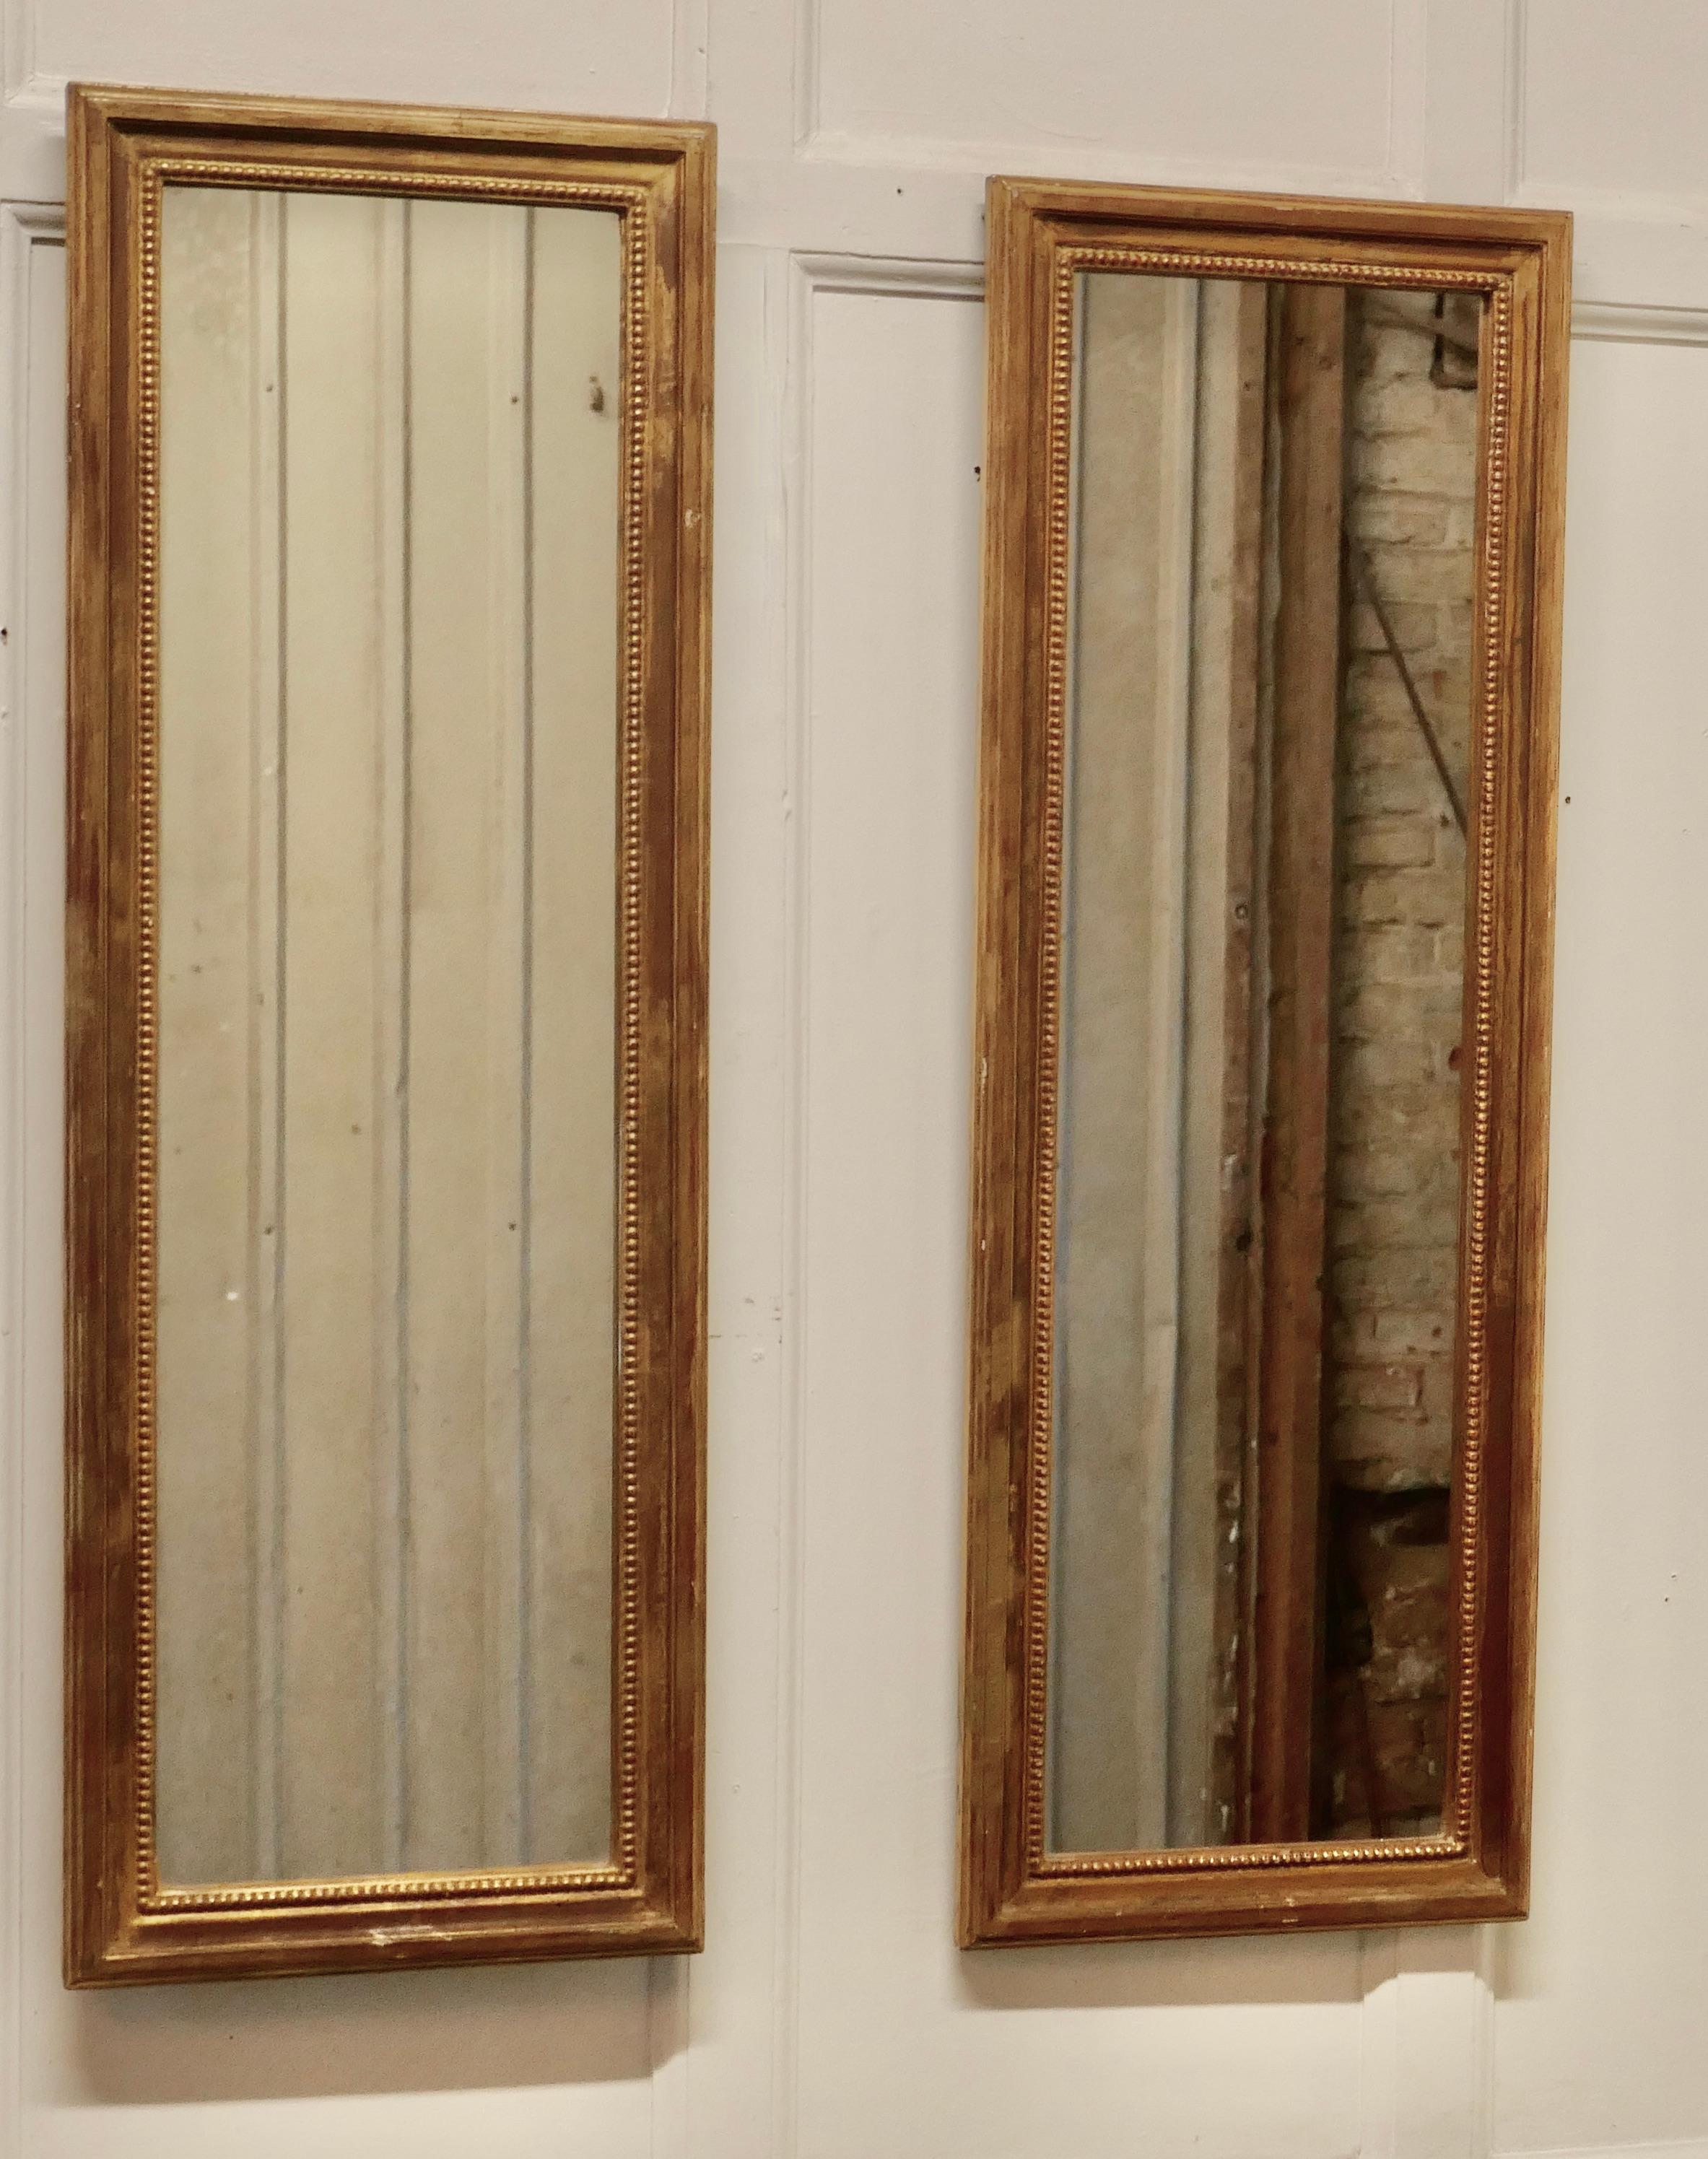 Pair of French gilt rectangular wall mirrors

The mirrors have a simple moulded 2” wide gold frames 
The glasses are is in good condition and they have heavy wooden backs 
A good mirror will always add light and elegance to a room and a pair is